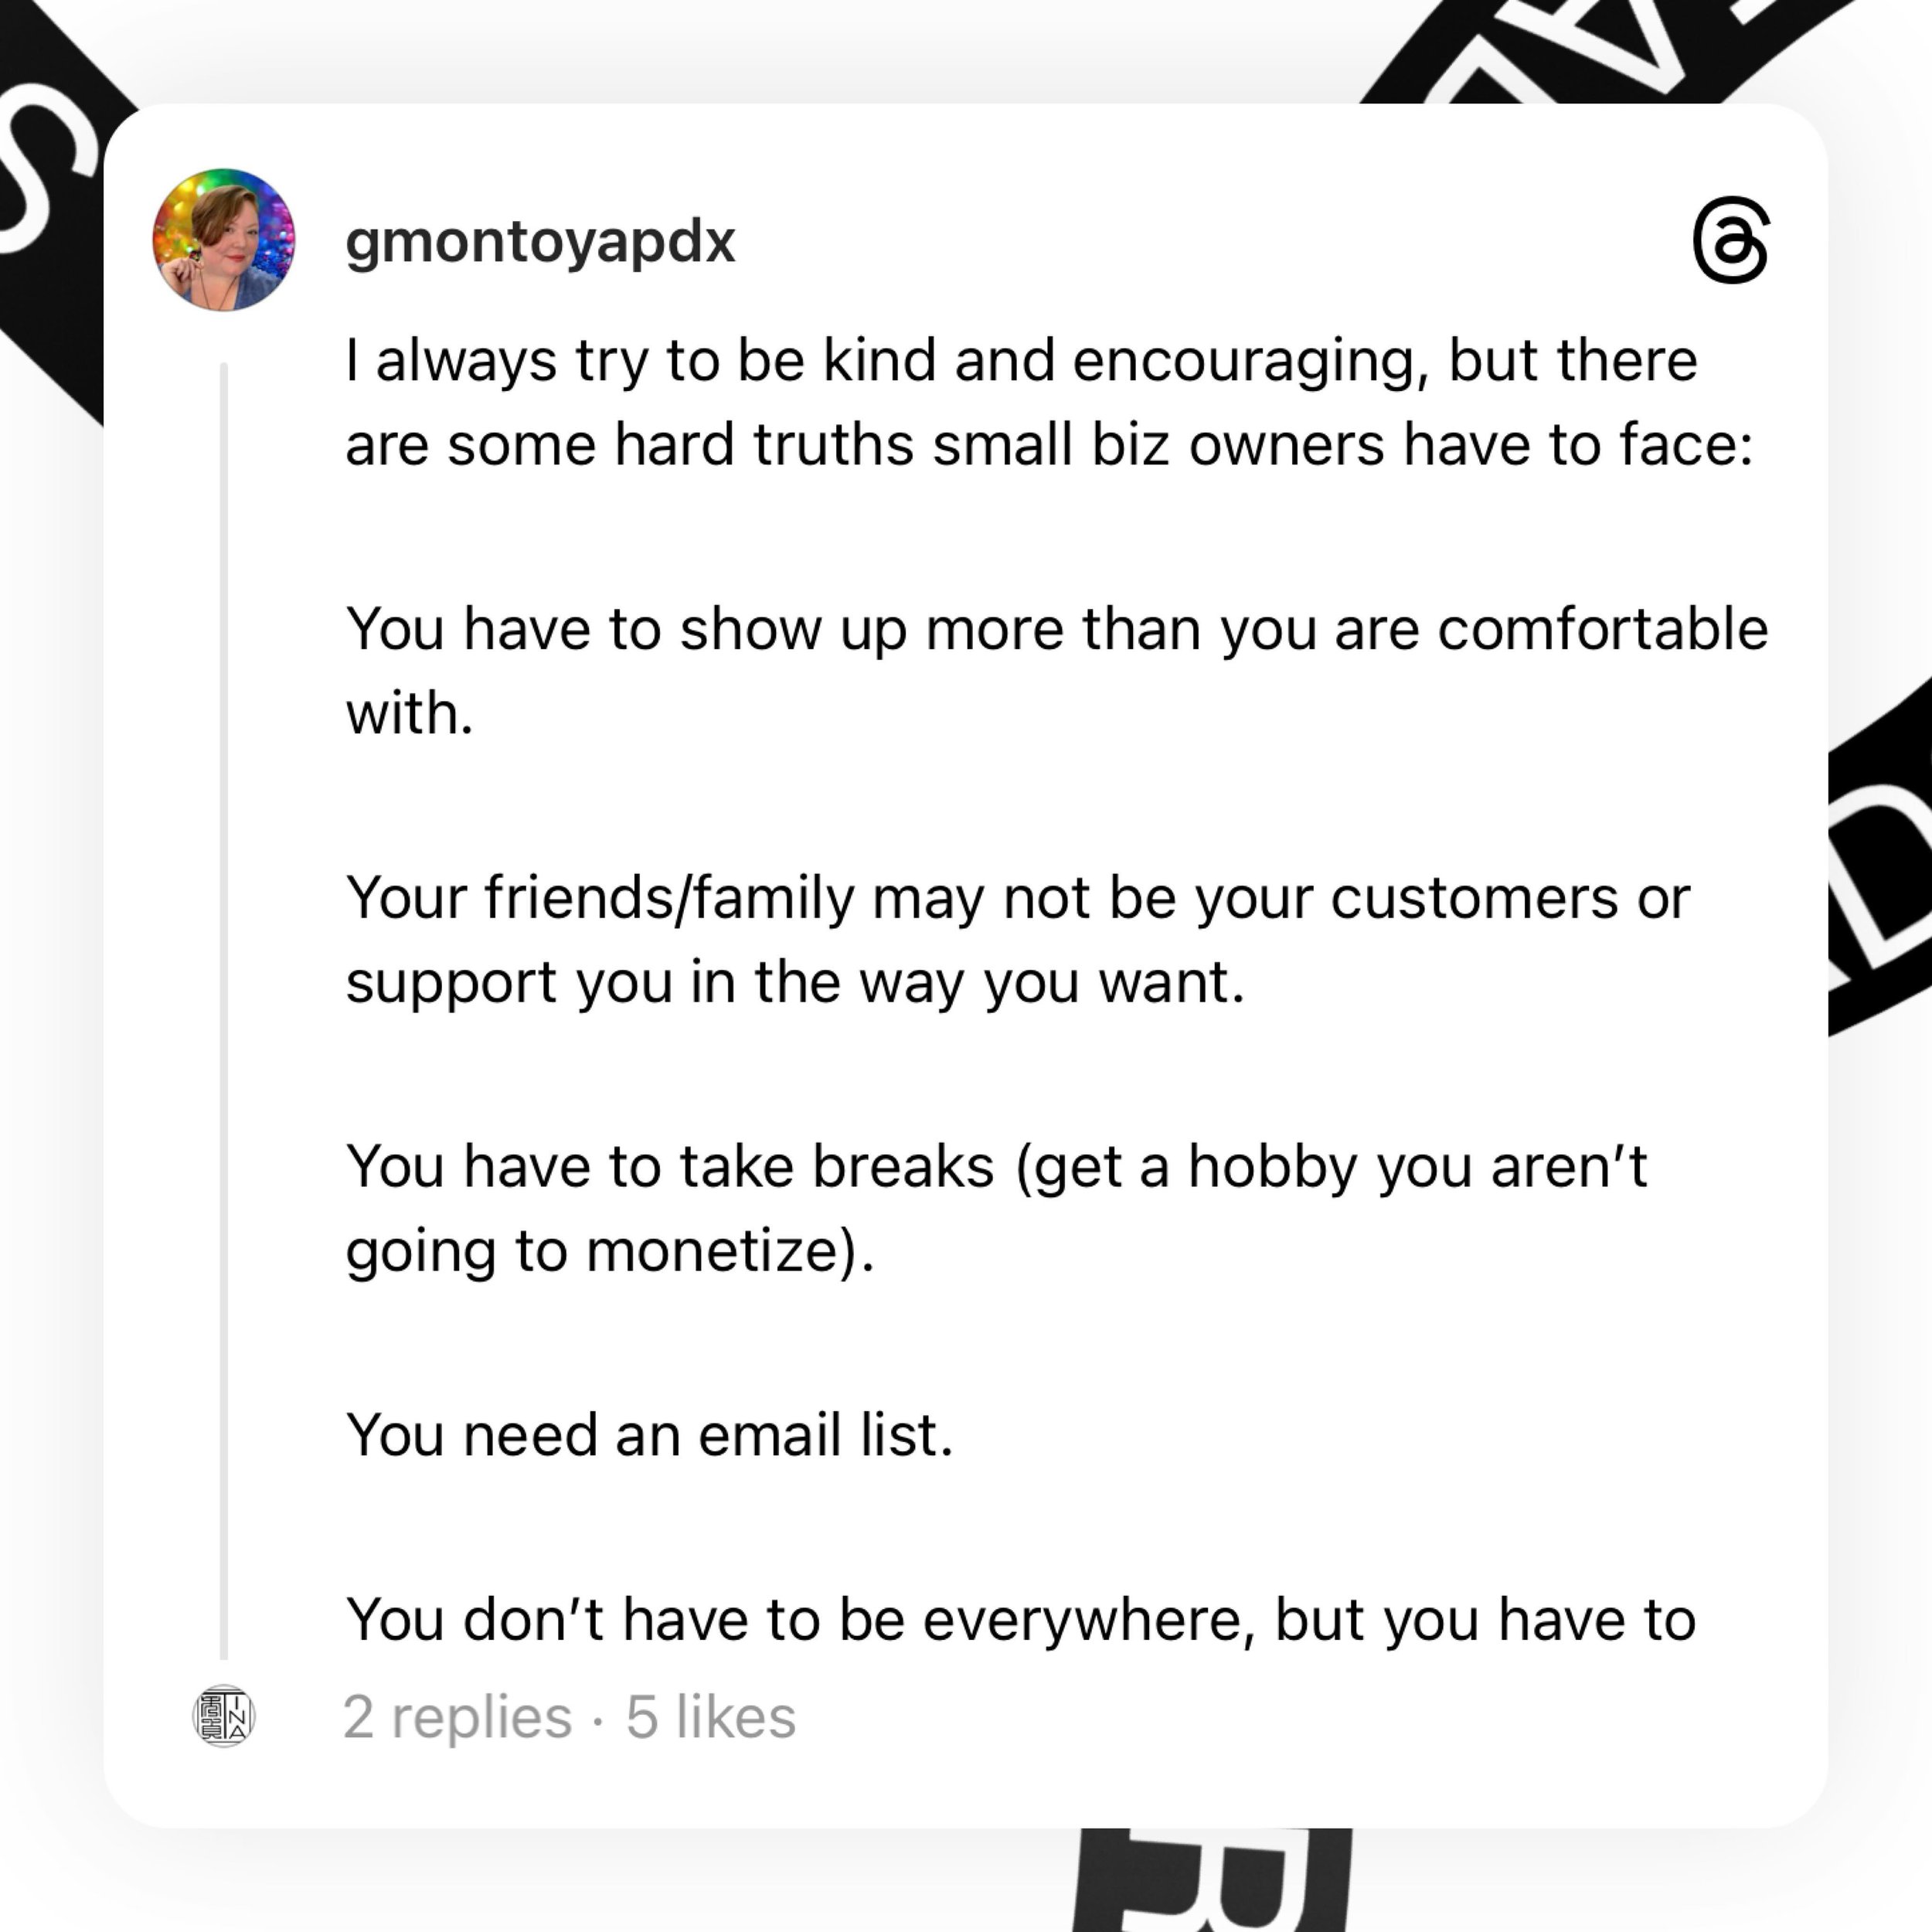 Biz owner hard truths

Show up more than you are comfortable.

Your friends/family may not be your customers. 

You have to take breaks (get a hobby).

You need an email list. 

You don&rsquo;t have to be everywhere, but you have to be somewhere.